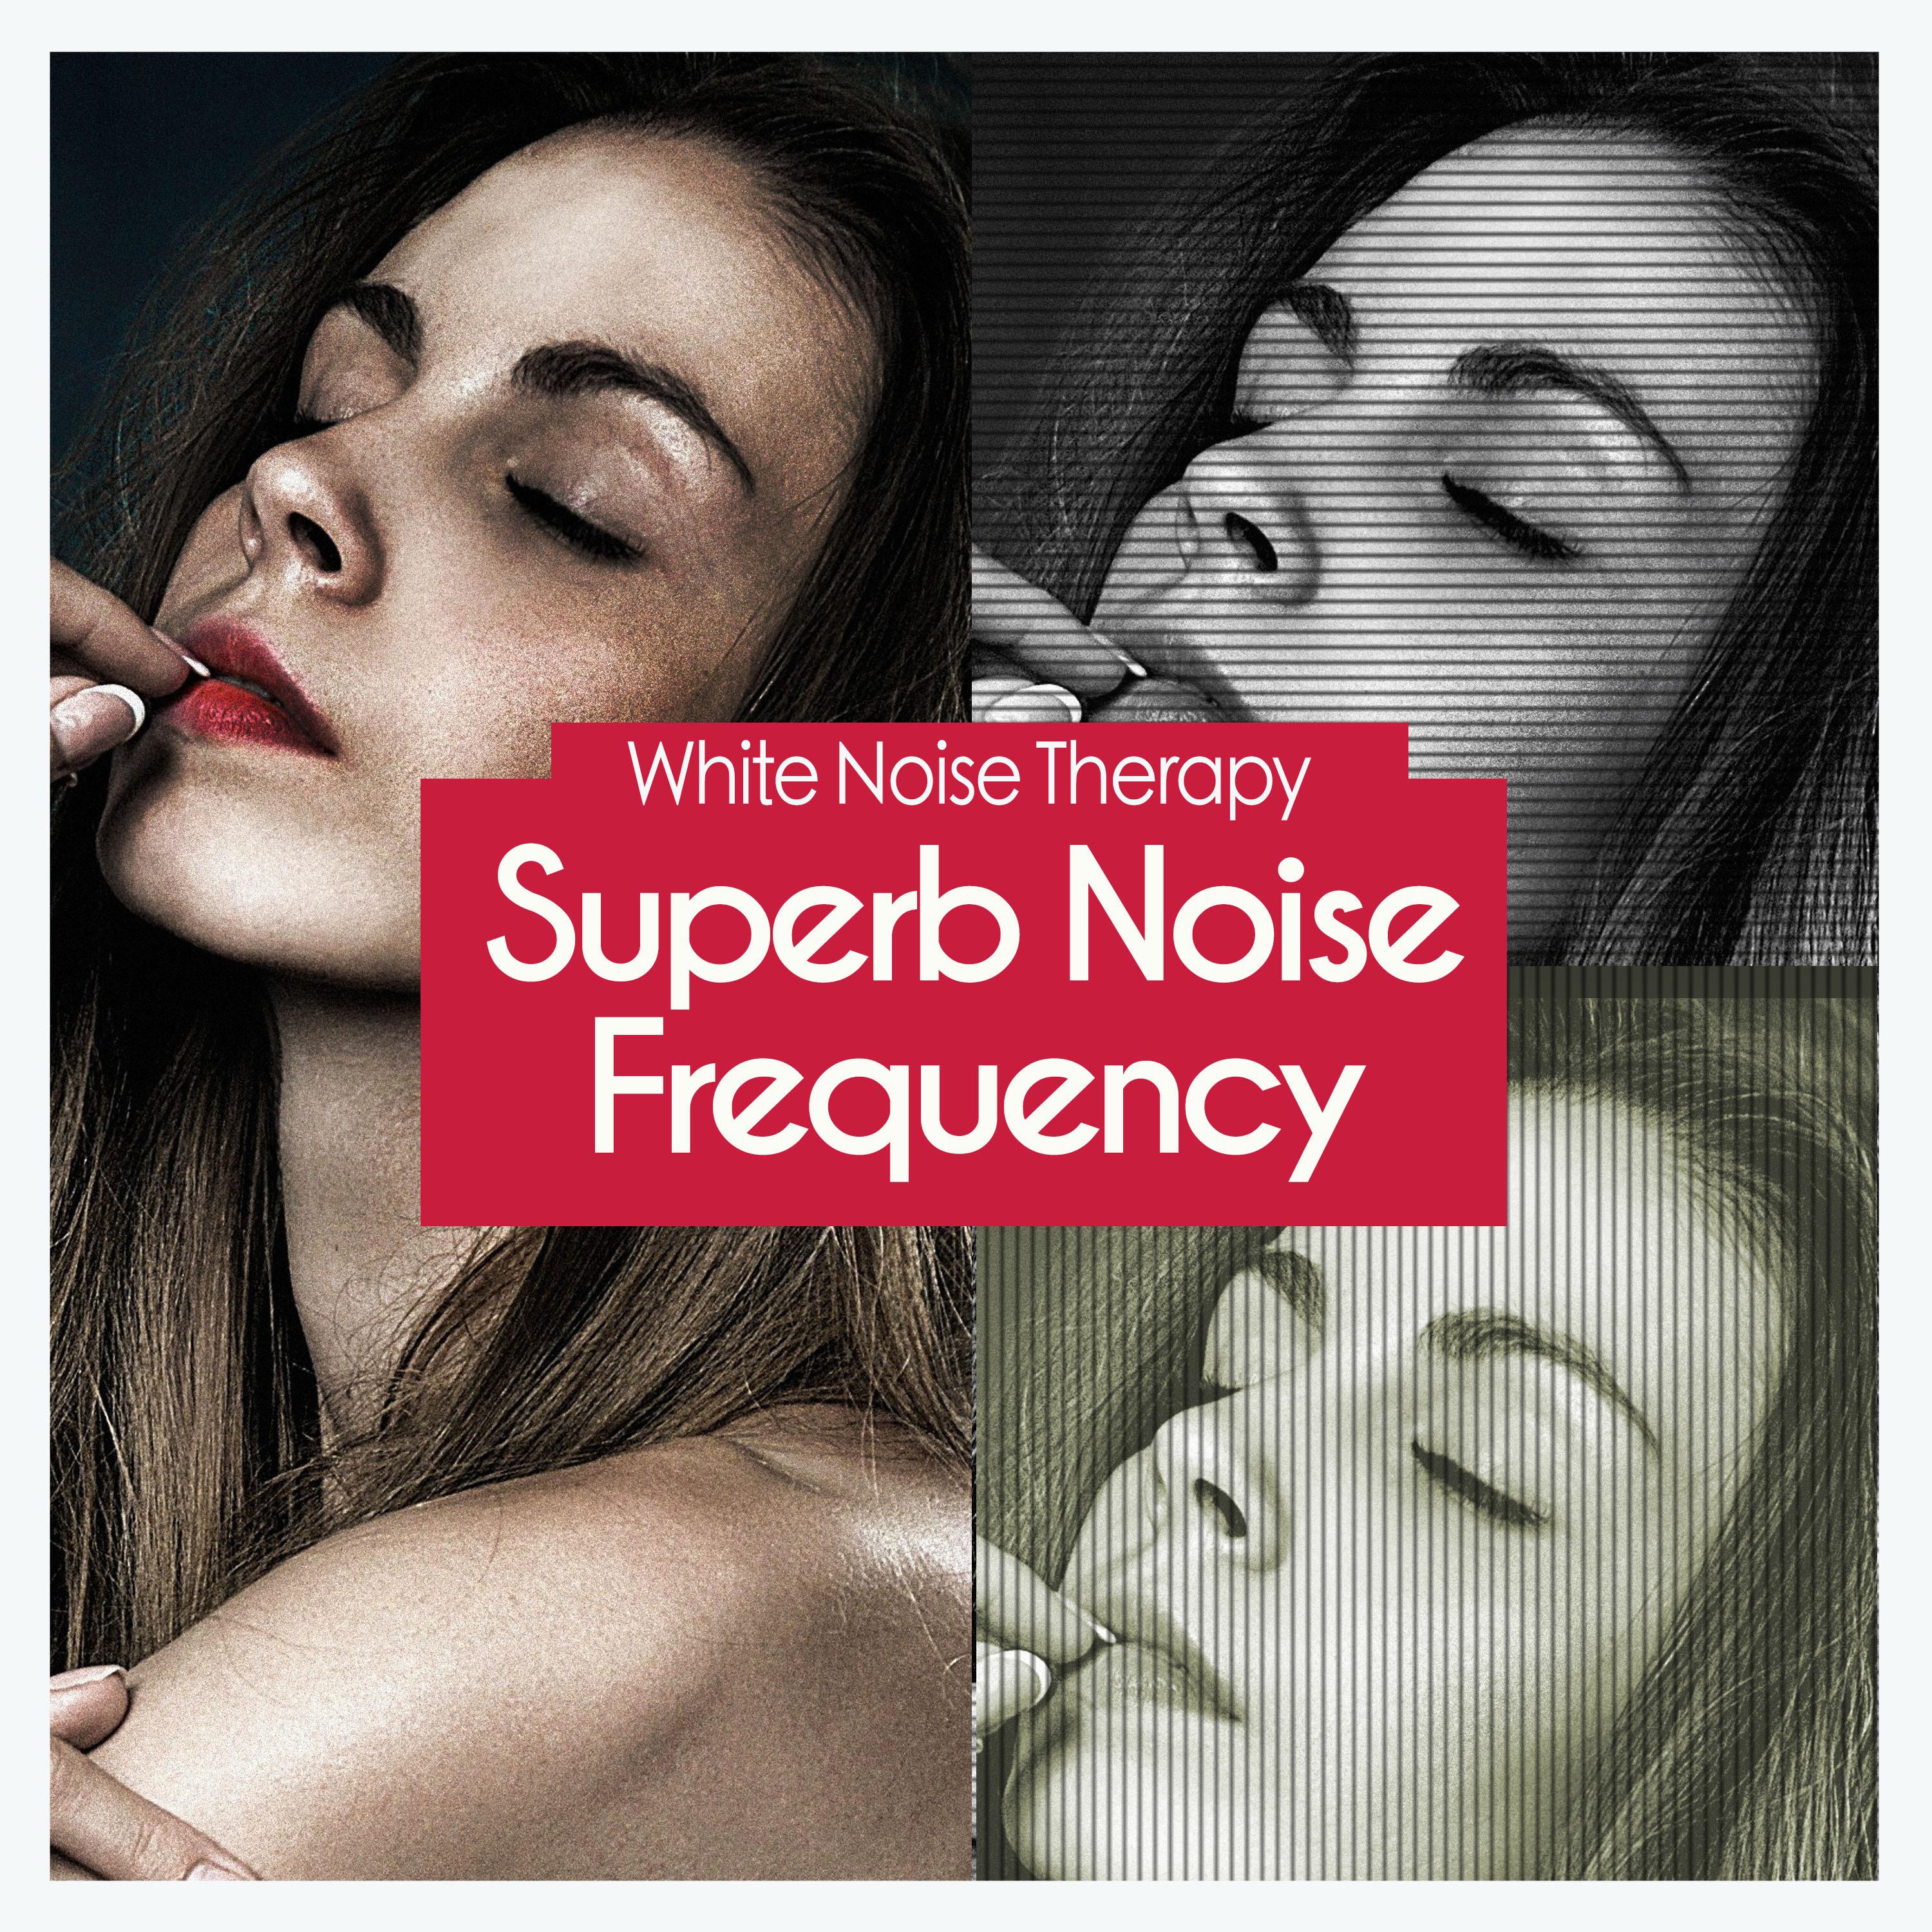 Superb Noise Frequency